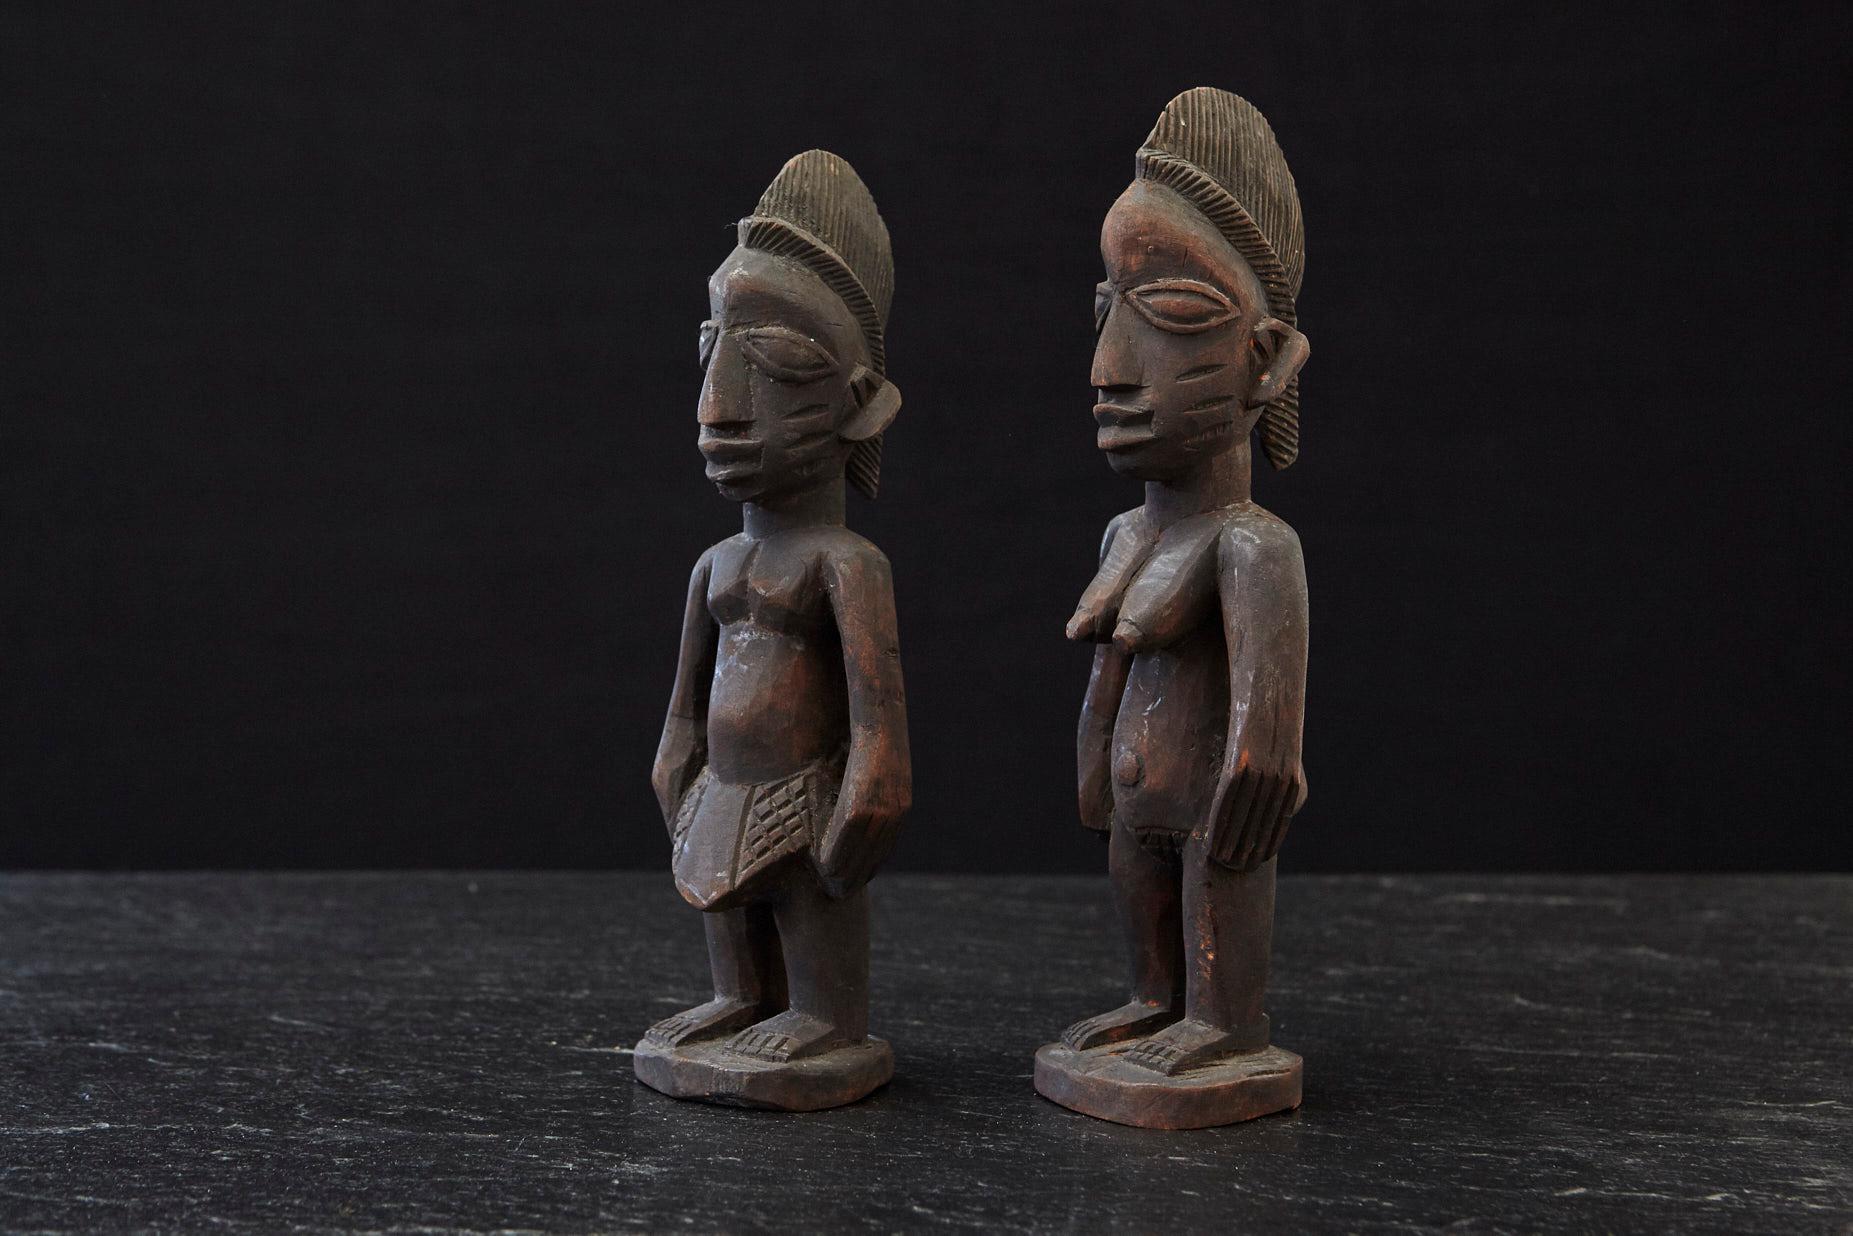 Yoruba people have one of the highest incidents of twin births in the world. As a result, twin children are regarded as extraordinary, divine beings protected by Sango, the deity of thunder. They are believed to be capable of bestowing immense